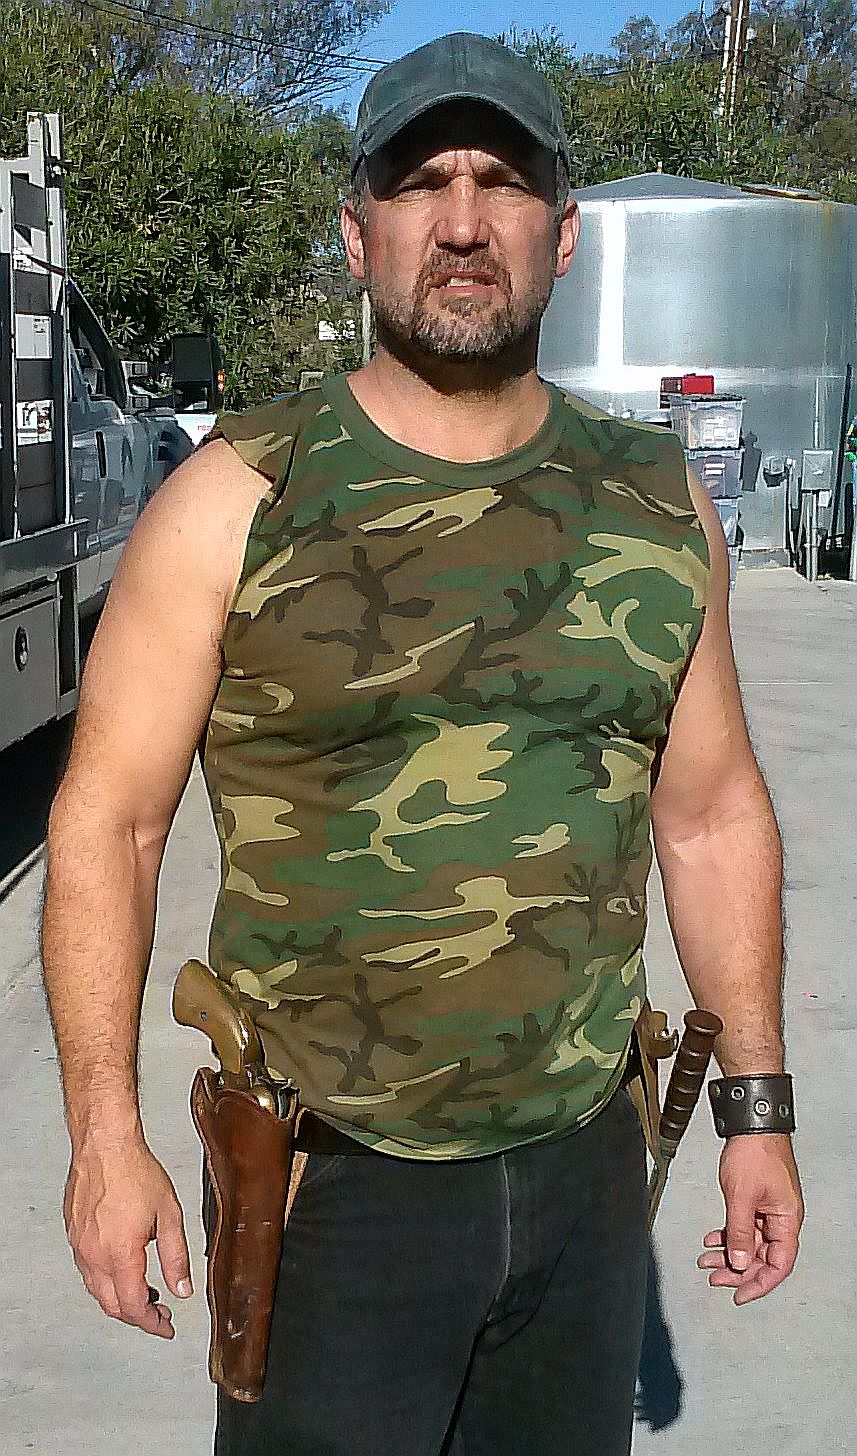 On Set of the TV Movie 'The List', playing the Militia Bodyguard.